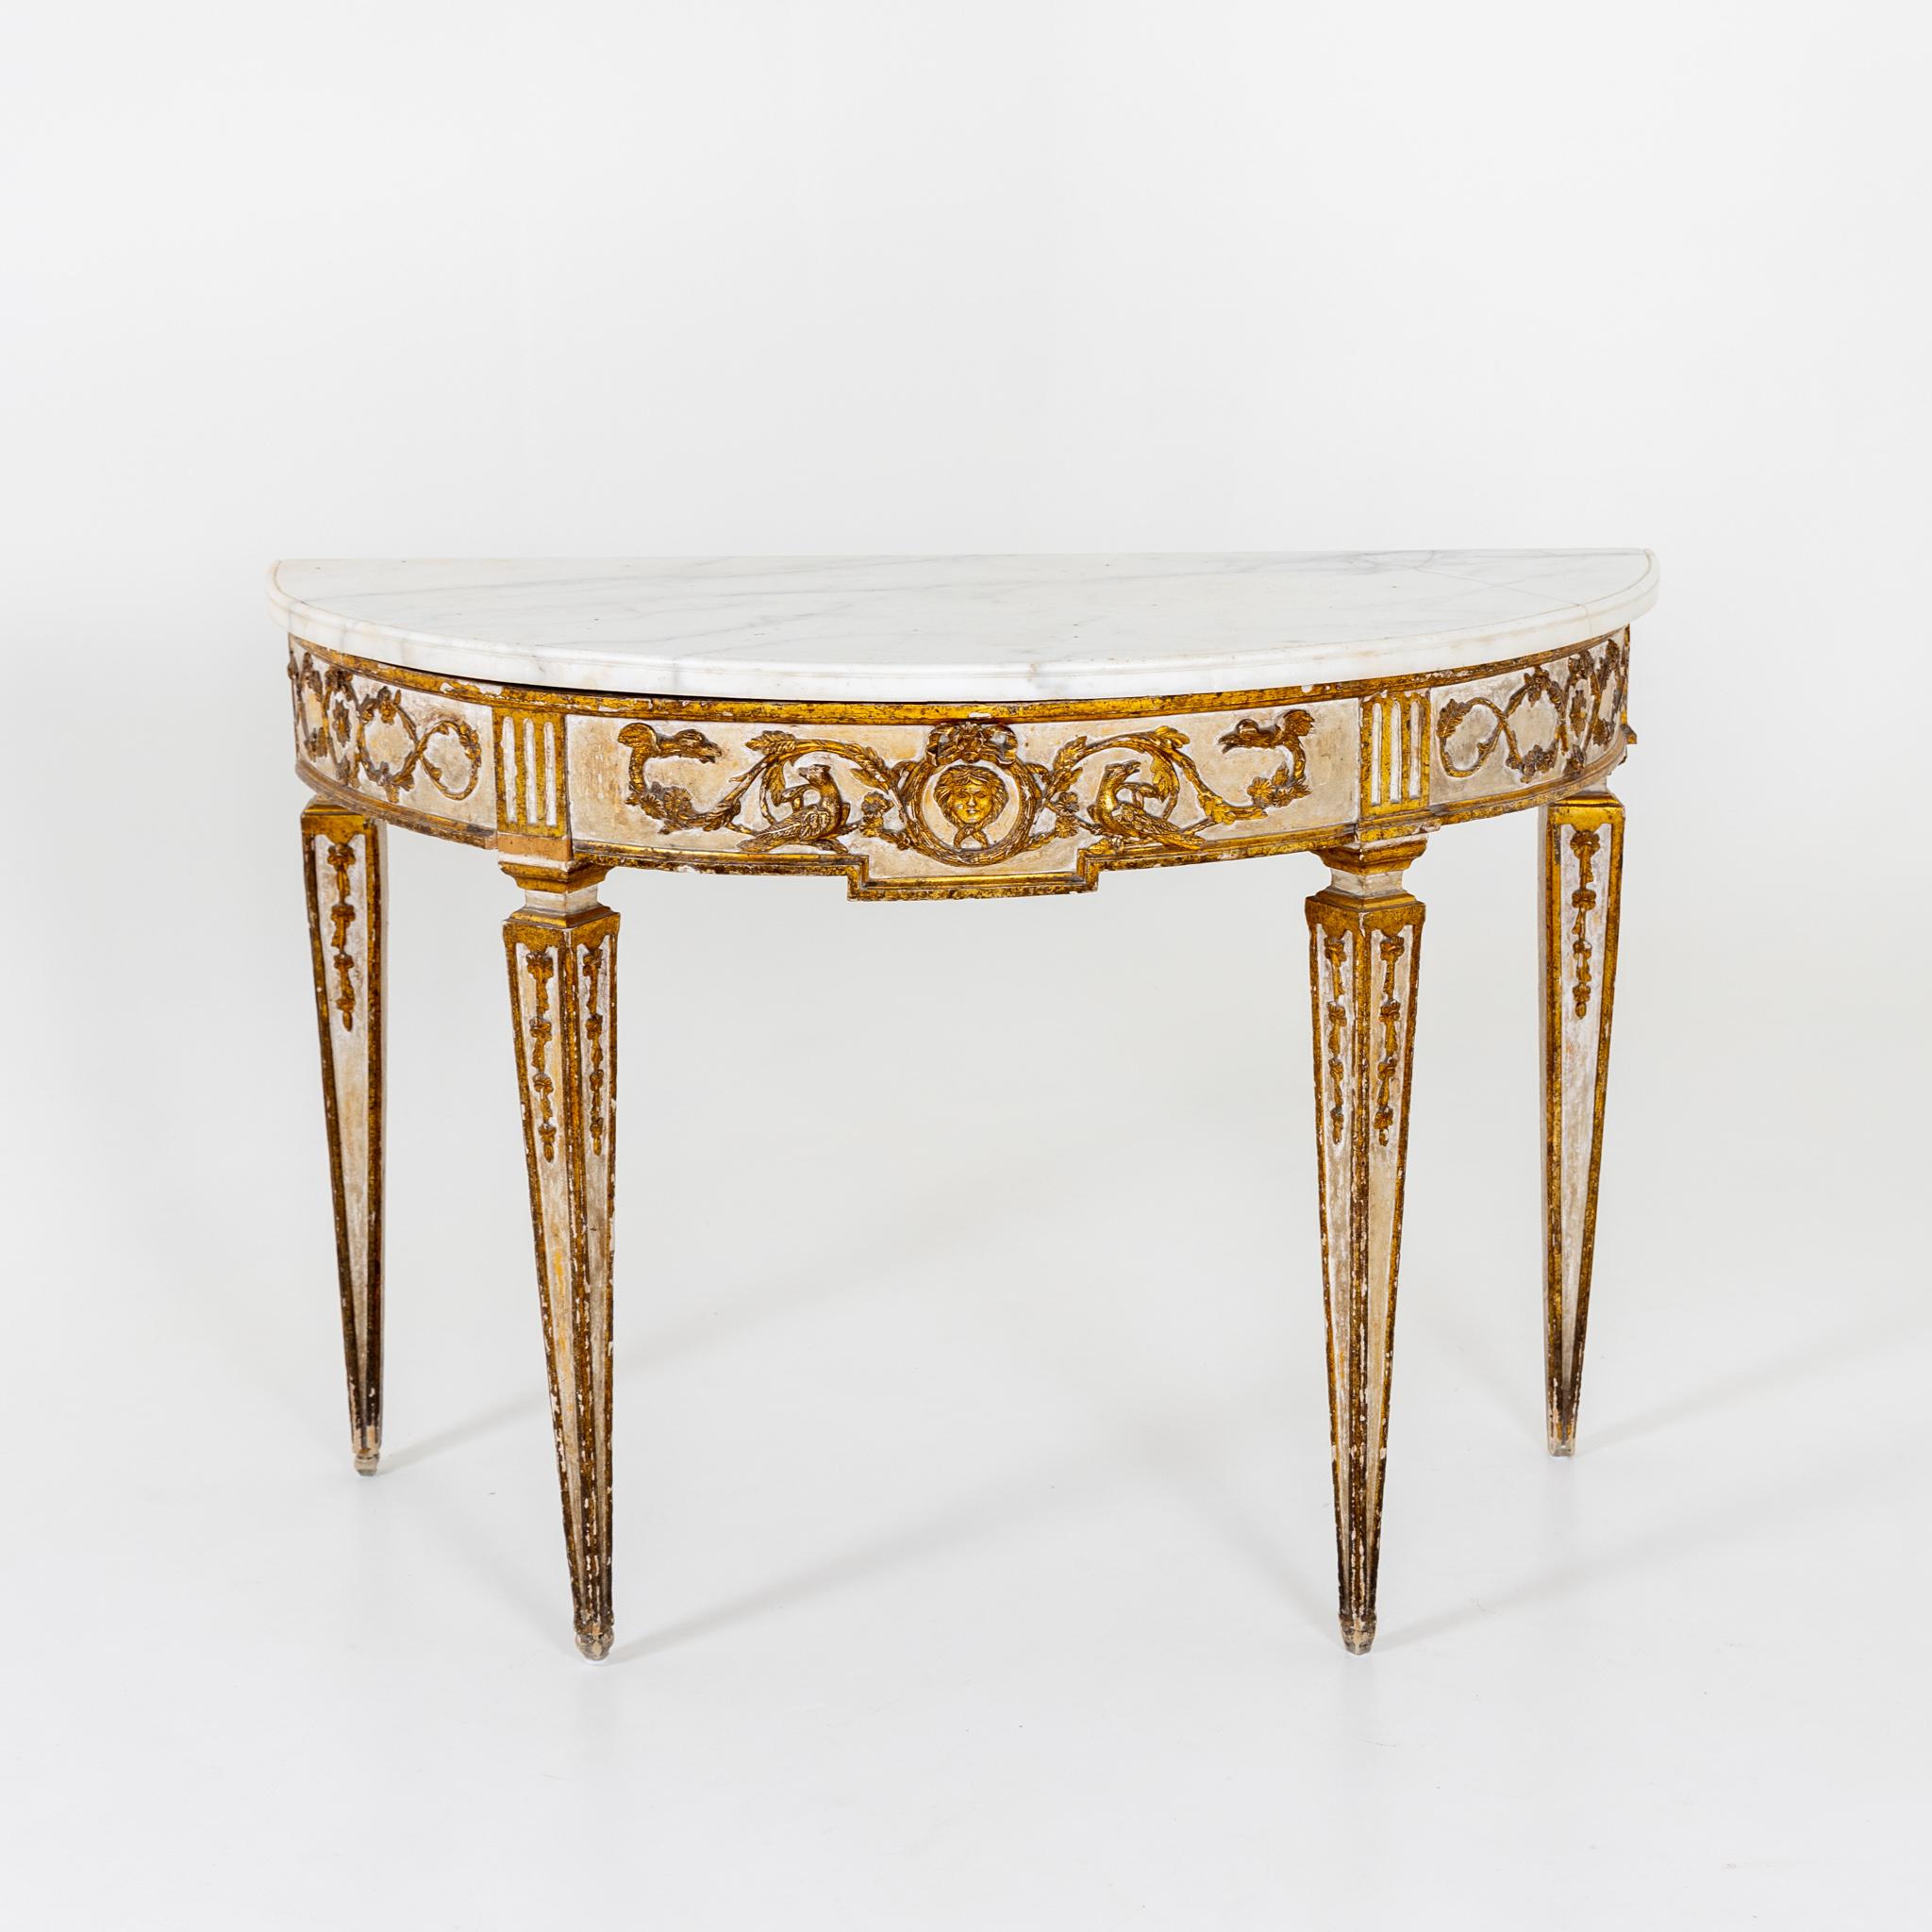 Demi-Lune console standing on tall square-pointed feet with gold-patinated decoration in the form of vines and mascarons in relief and a white marble top.